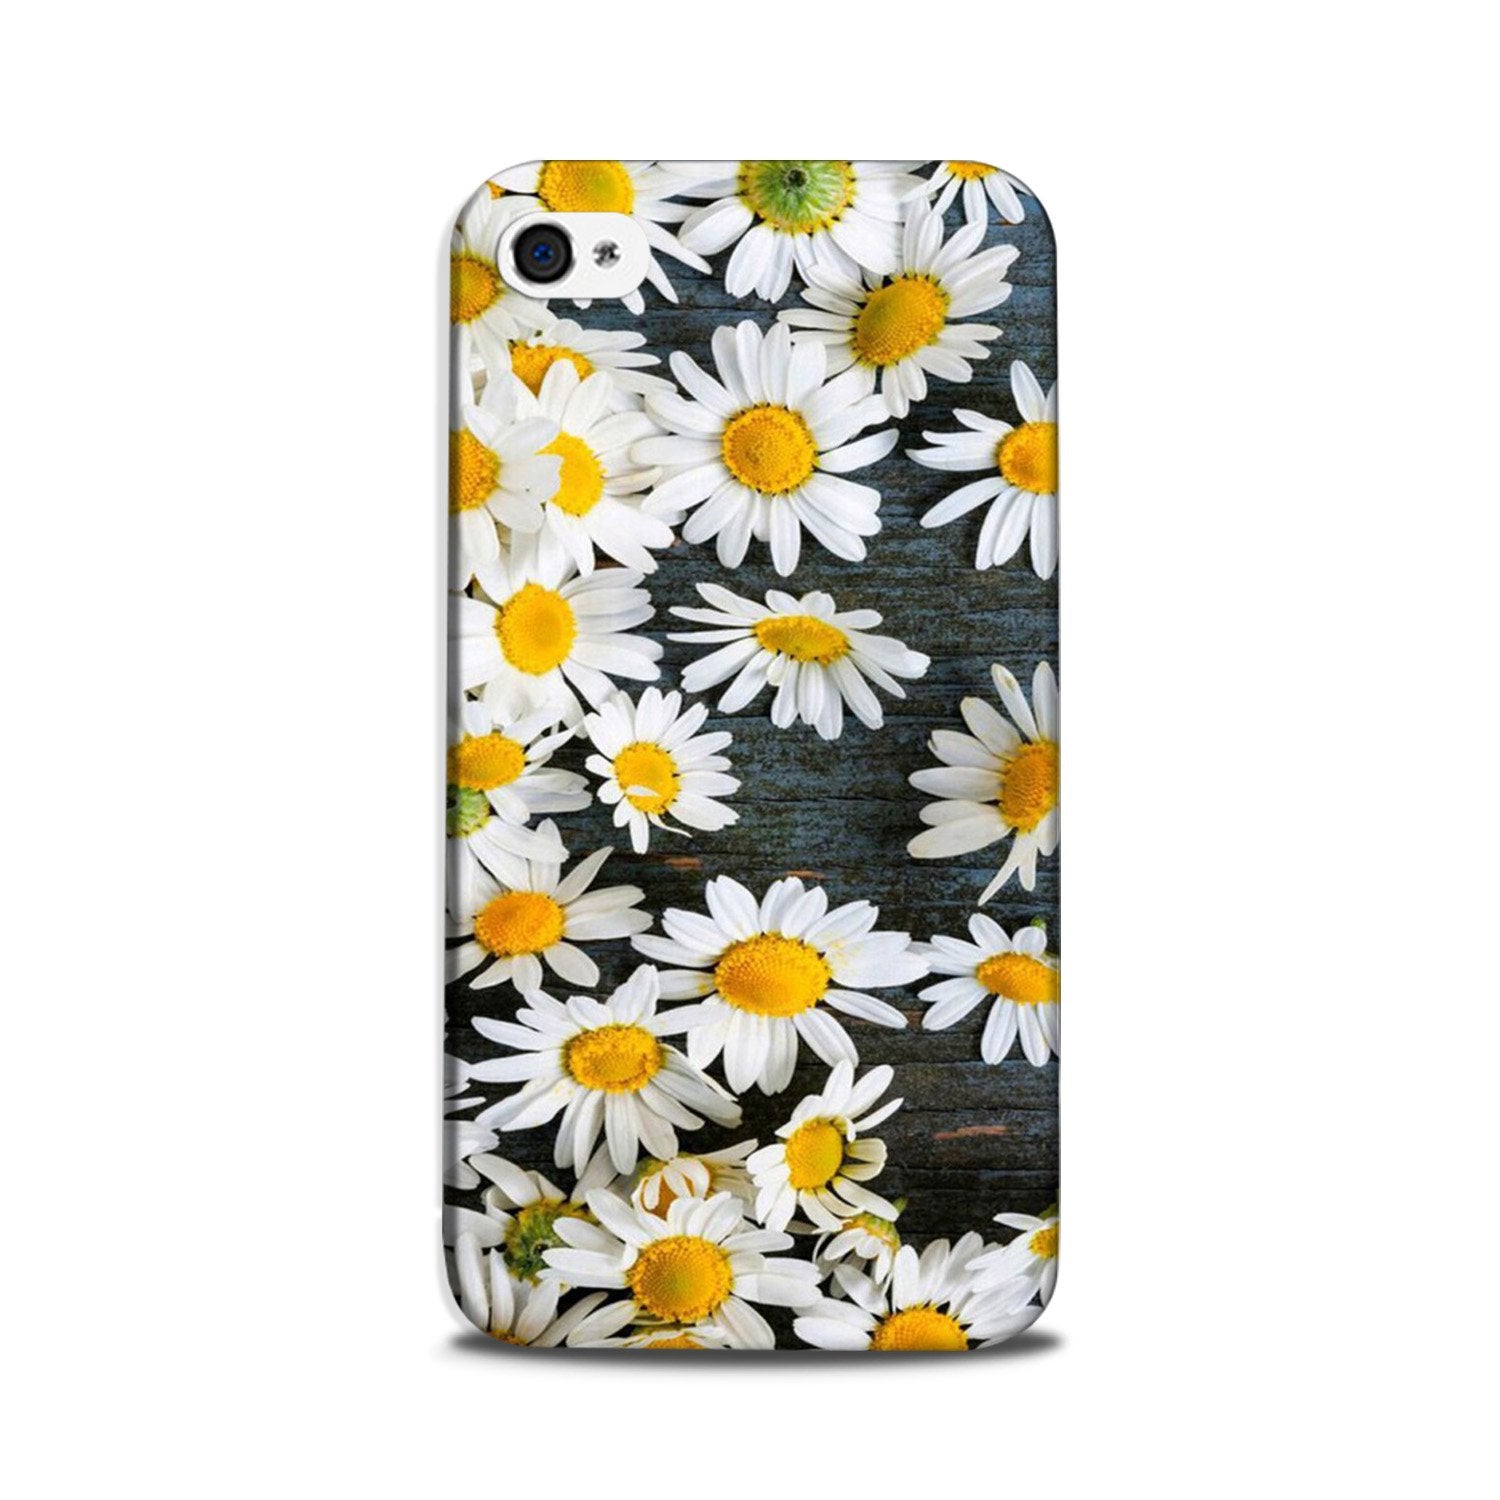 White flowers2 Case for iPhone 5/ 5s